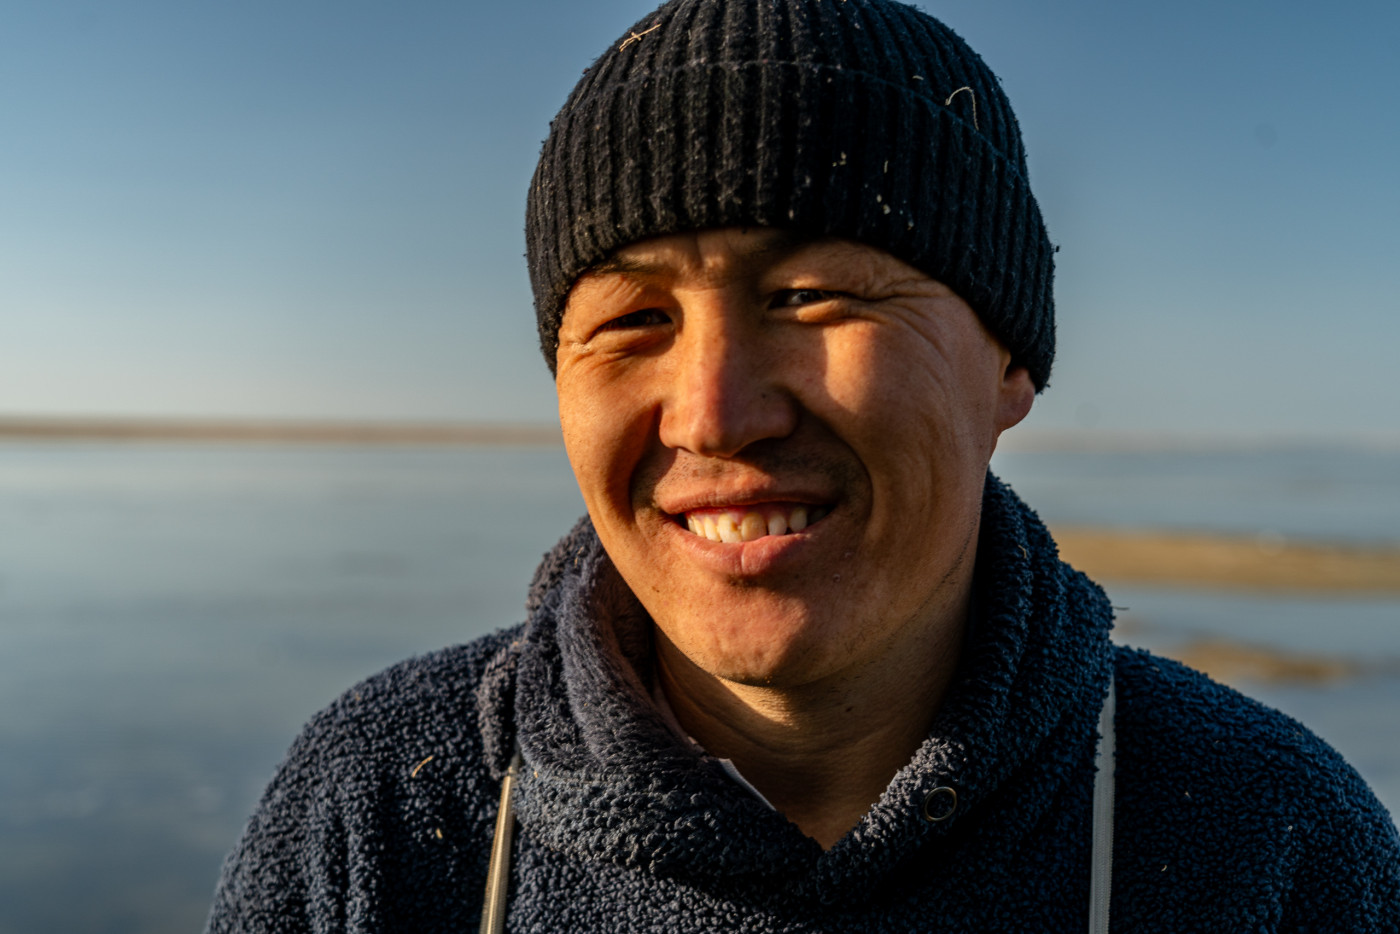 Kazakh fisherman Aidarbek Altay Uly, pictured Tuesday, Nov. 7, 2023, says that the section of the Aral Sea where he fishes has significantly shrunk in recent years and that the lake's fish are once again disappearing as the water becomes more saline. Abduaziz Madyarov / Special For The Great Salt Lake Collaborative